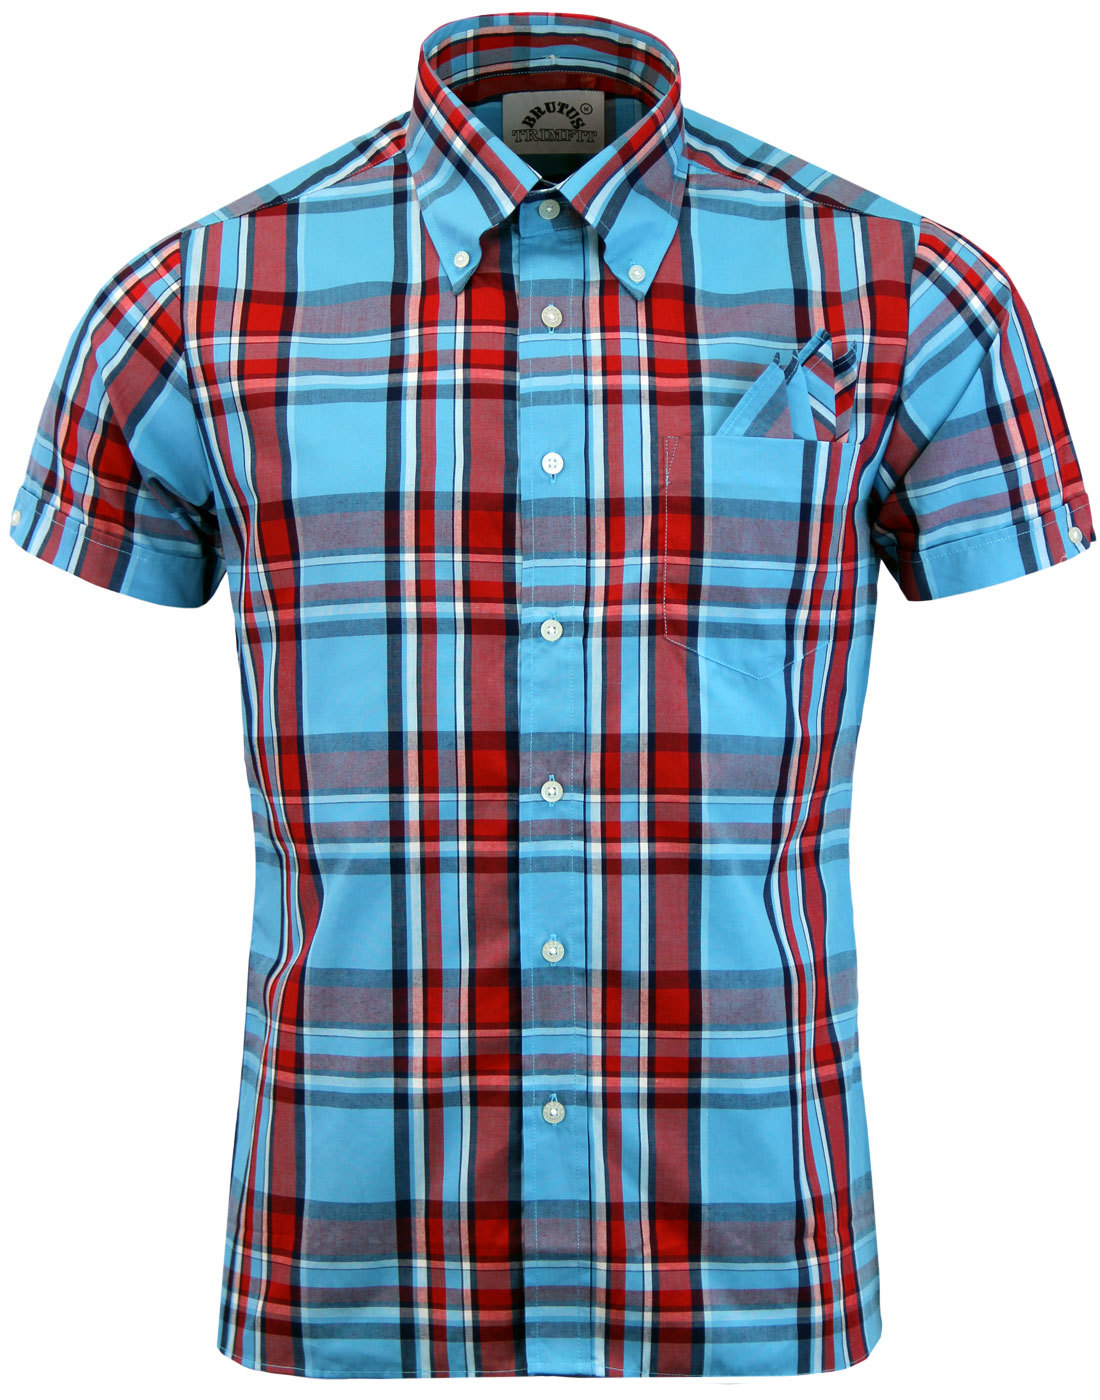 BRUTUS TRIMFIT Mod Button Down Heritage Check Shirt in Light Blue